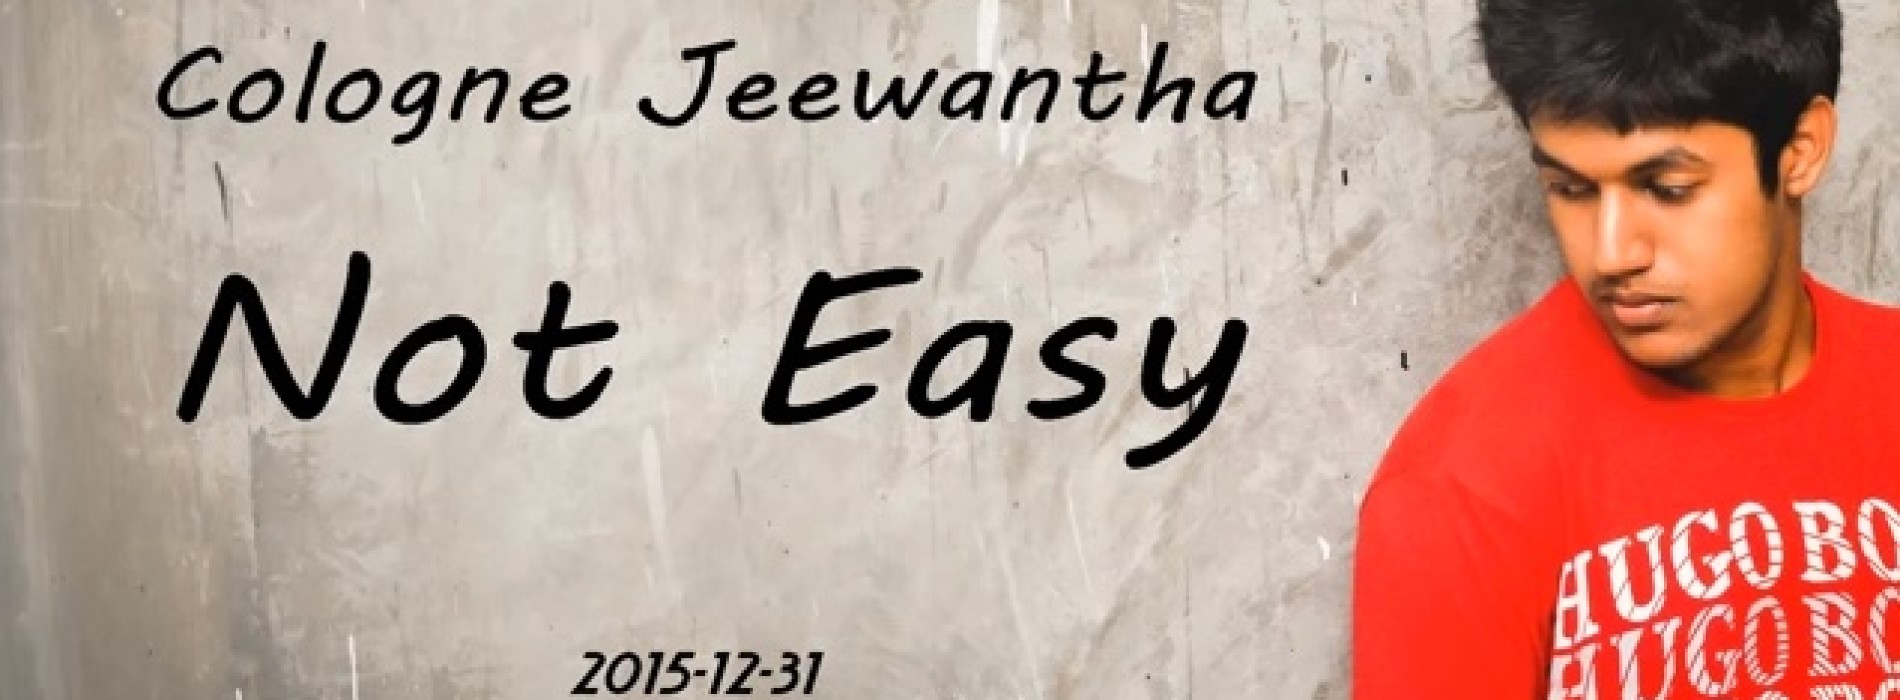 Cologne Jeewantha – Not Easy